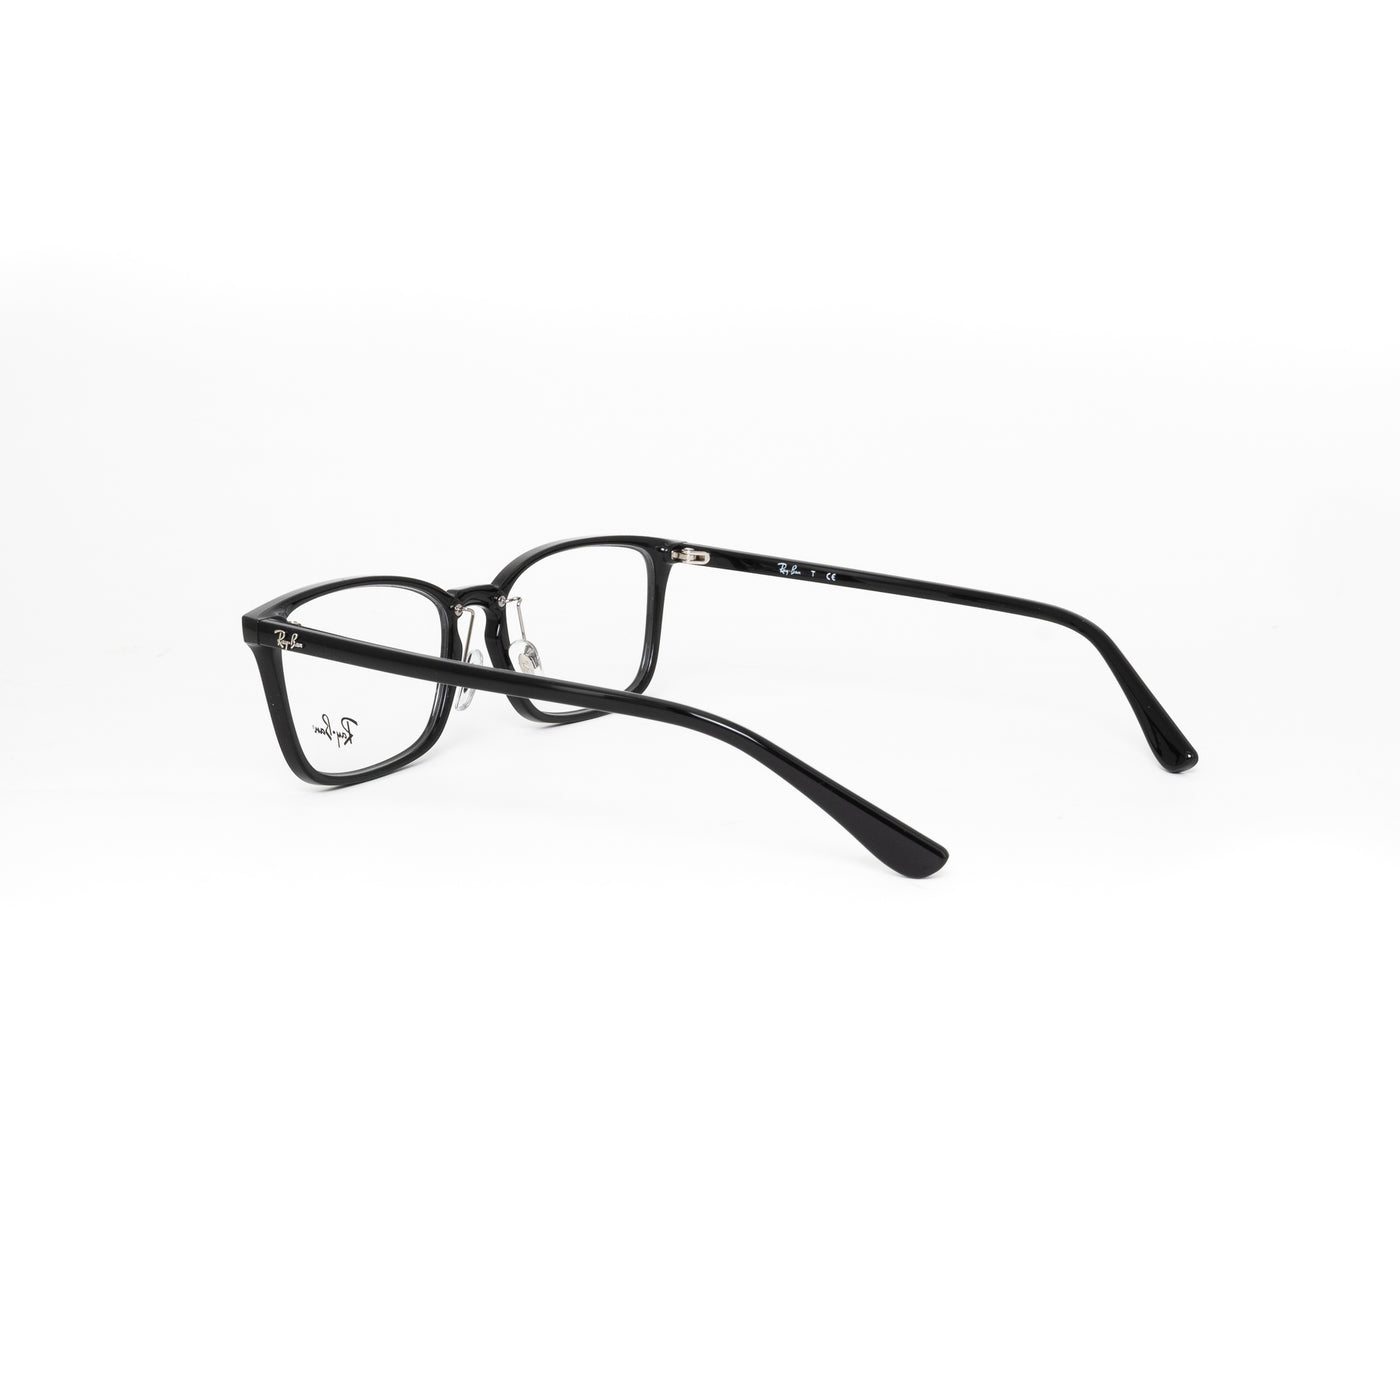 Ray-Ban RB7149D/2000_55 | Eyeglasses - Vision Express Optical Philippines